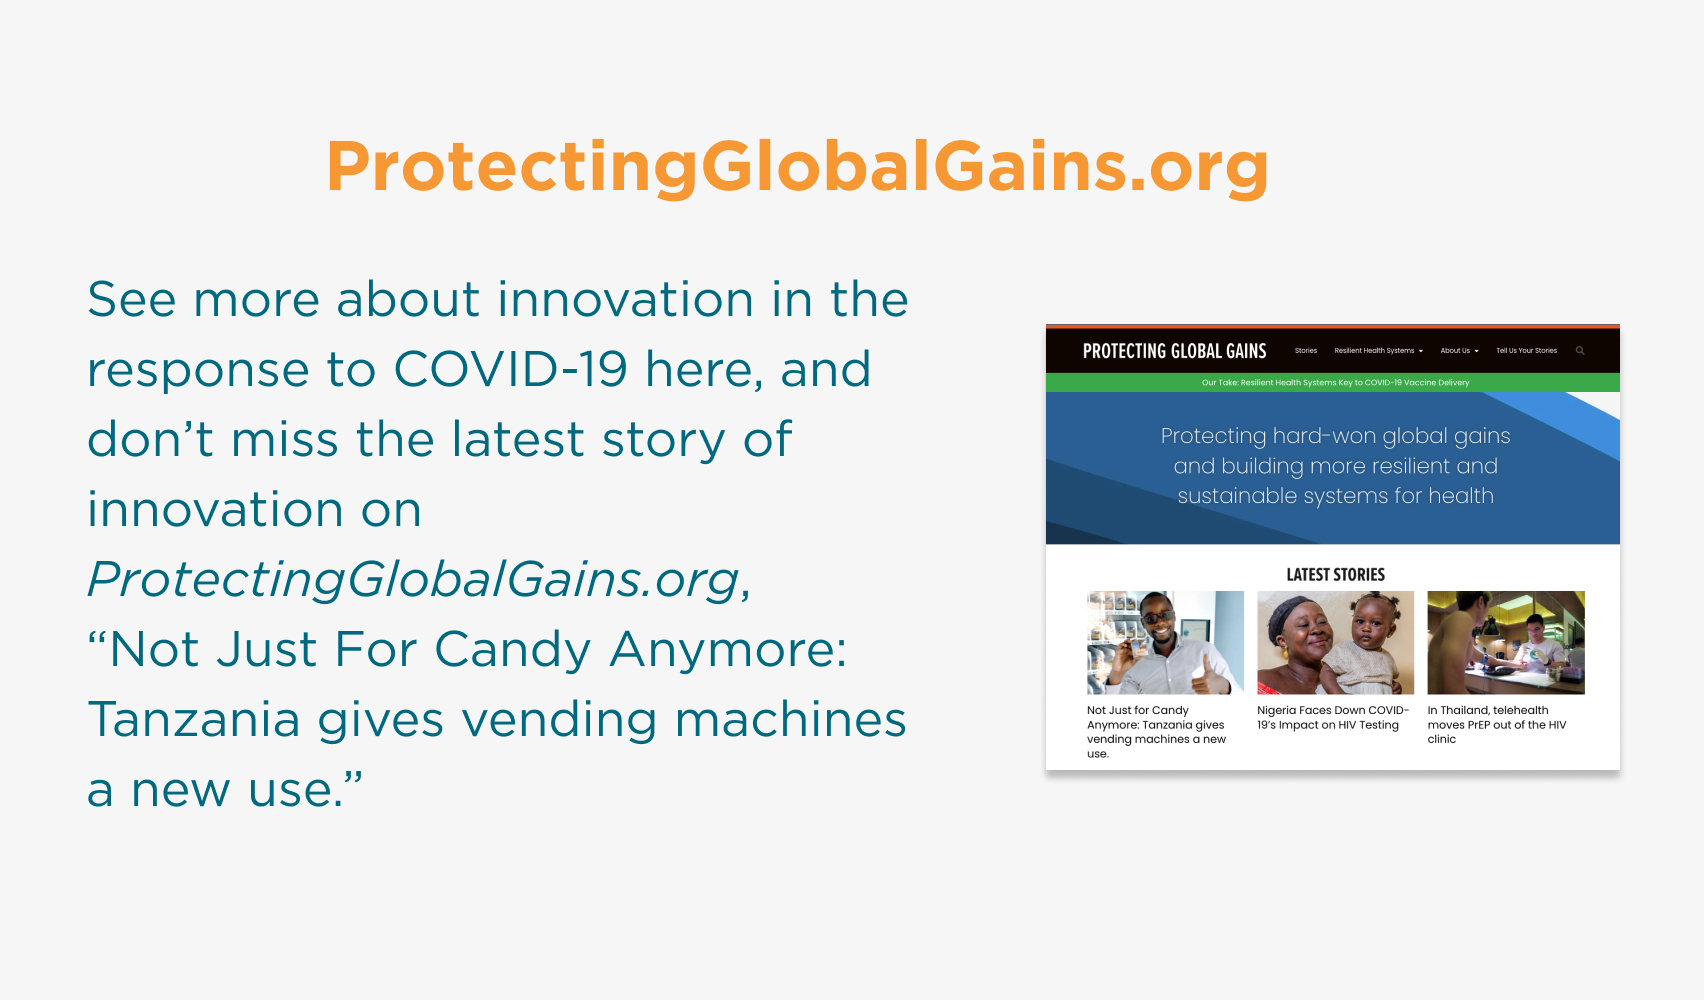 Link to more info on protection global gains dot org